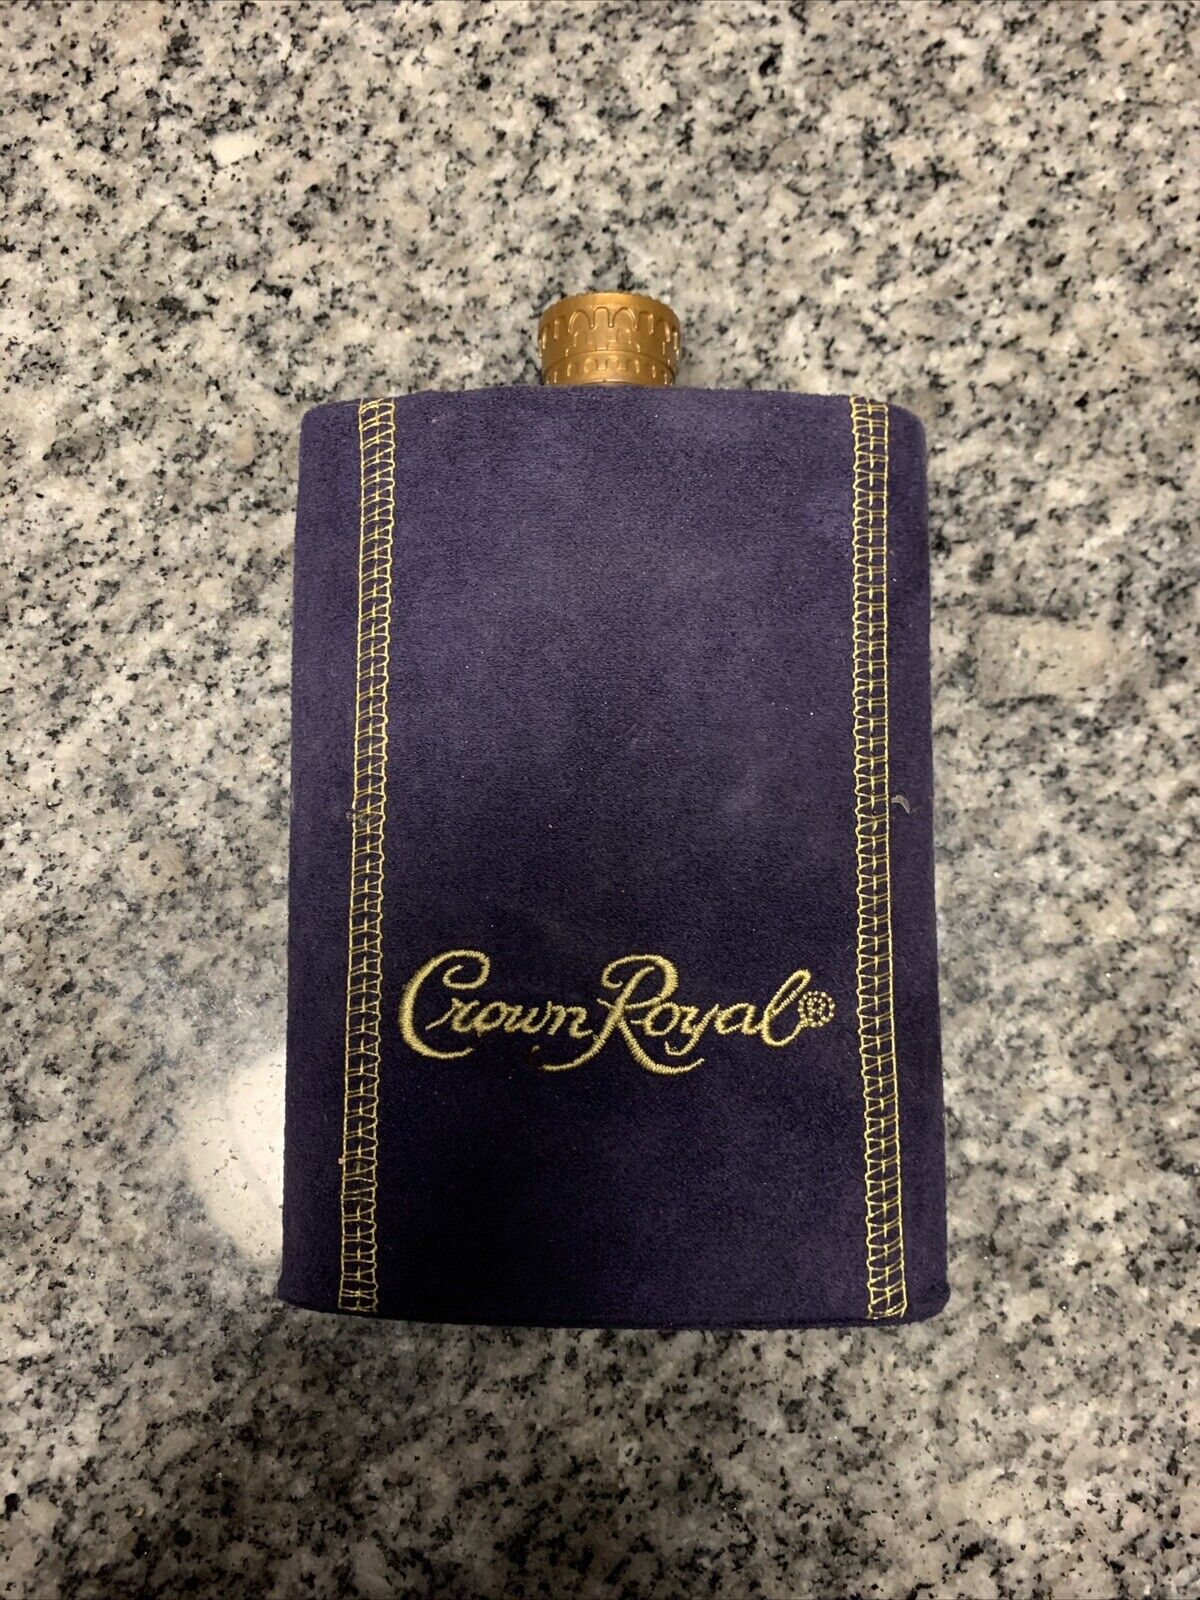 Crown Royal 8oz Stainless Steel Whiskey Flask Removable Purple Cover 